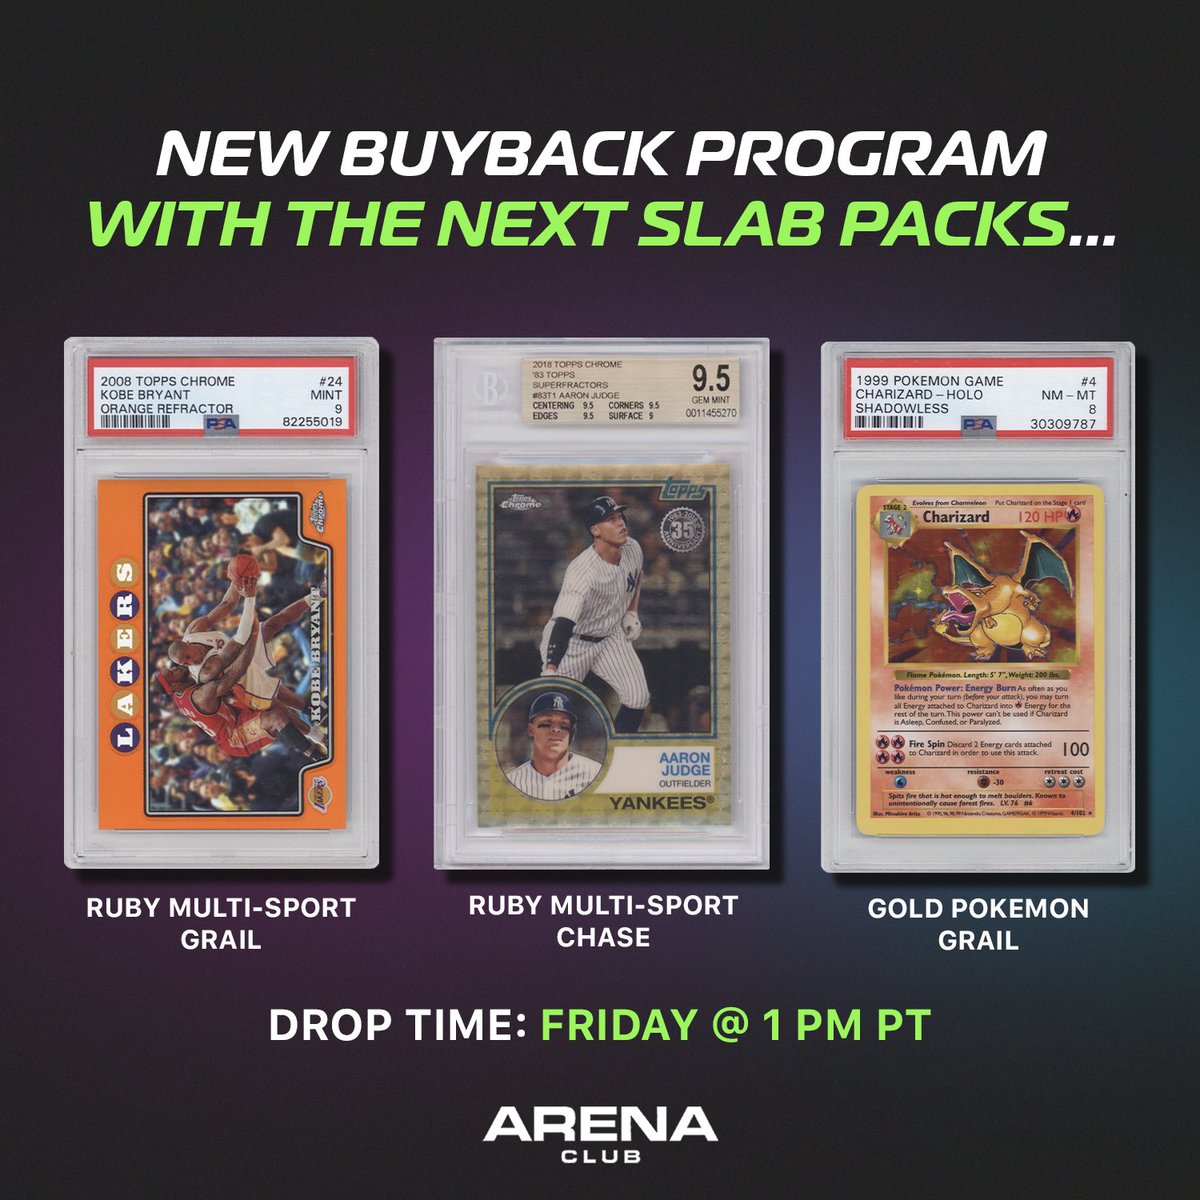 Introducing Arena Club's innovative Buy Back Program this week, allowing you to sell your cards back post-reveal. Don't miss out on this exciting chance! 💥 Mark your calendars and set your alarms for the big drop on April 19th at 10am PT.